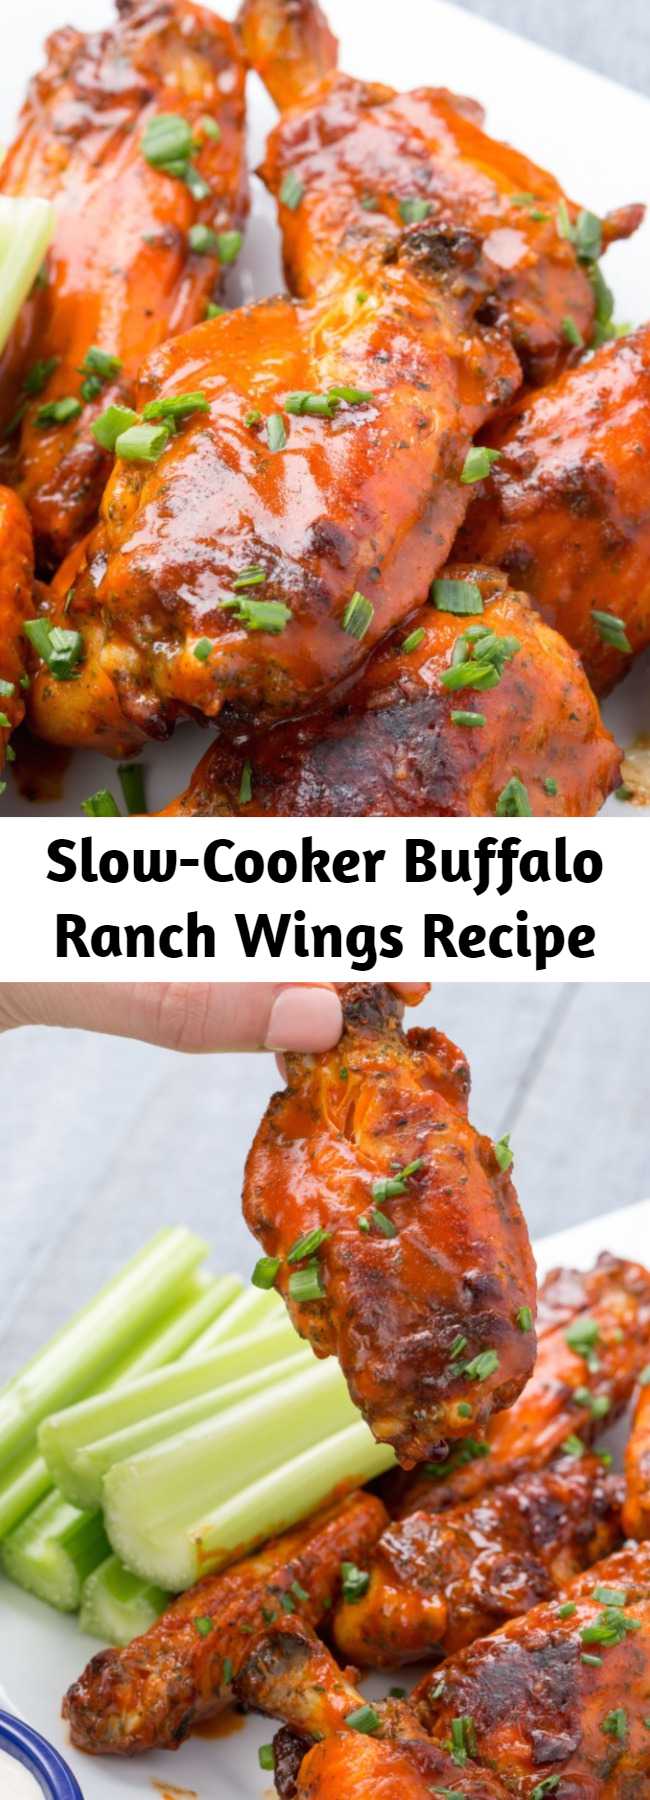 Slow-Cooker Buffalo Ranch Wings Recipe - Any true football fan knows that Game Day isn't complete without buffalo ranch something. These are doused in ranch seasoning and sprinkled with fresh chives for extra flavor.